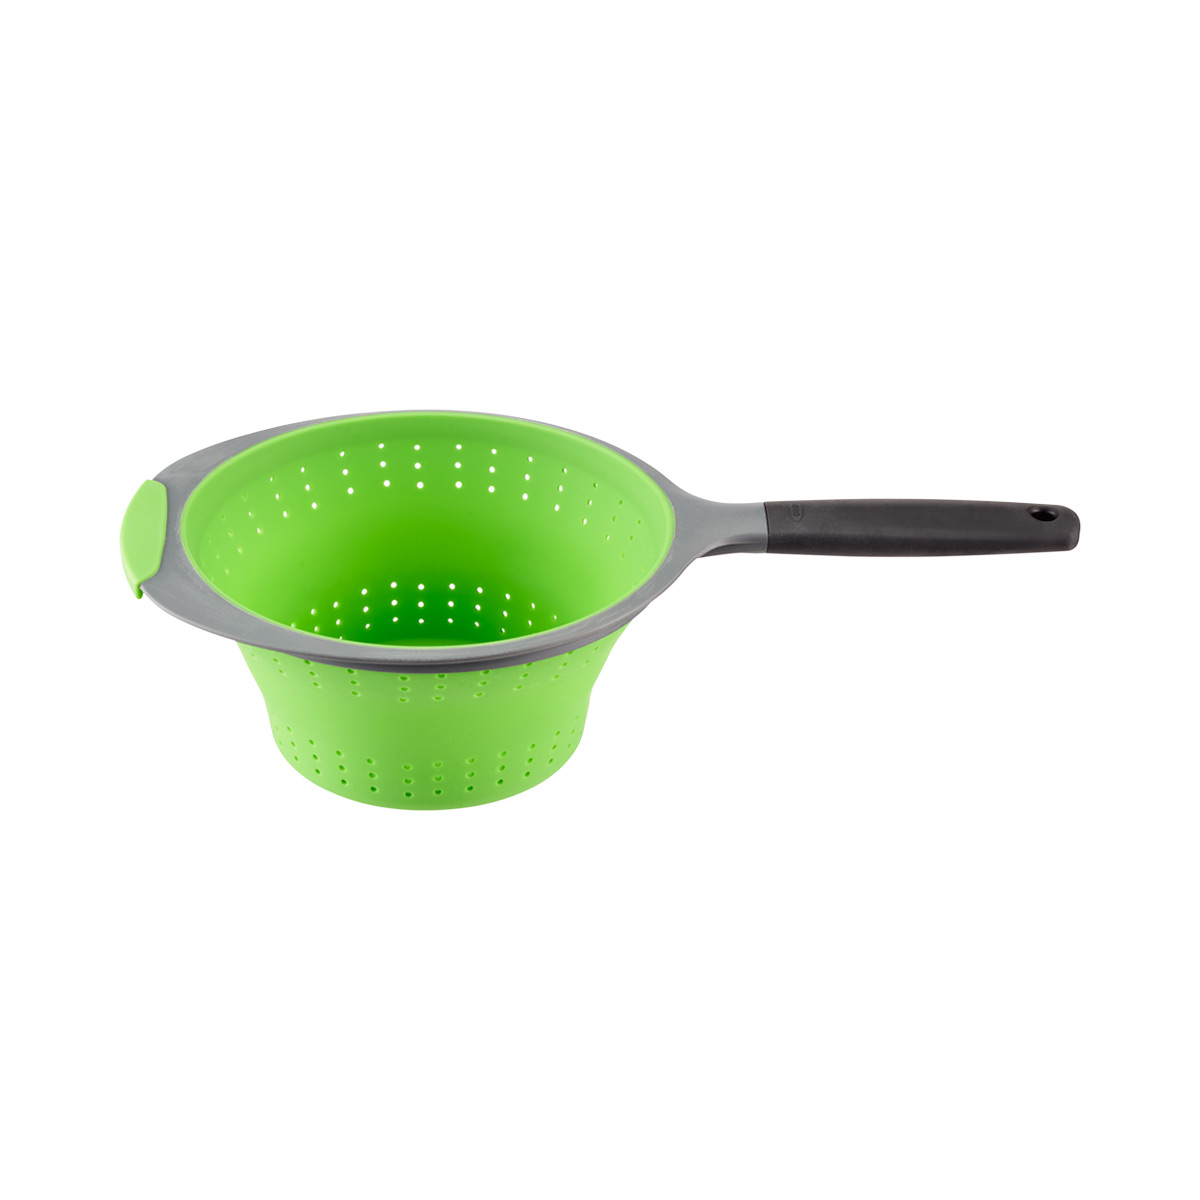 OXO 2 qt. Collapsible Strainer | The Container Store